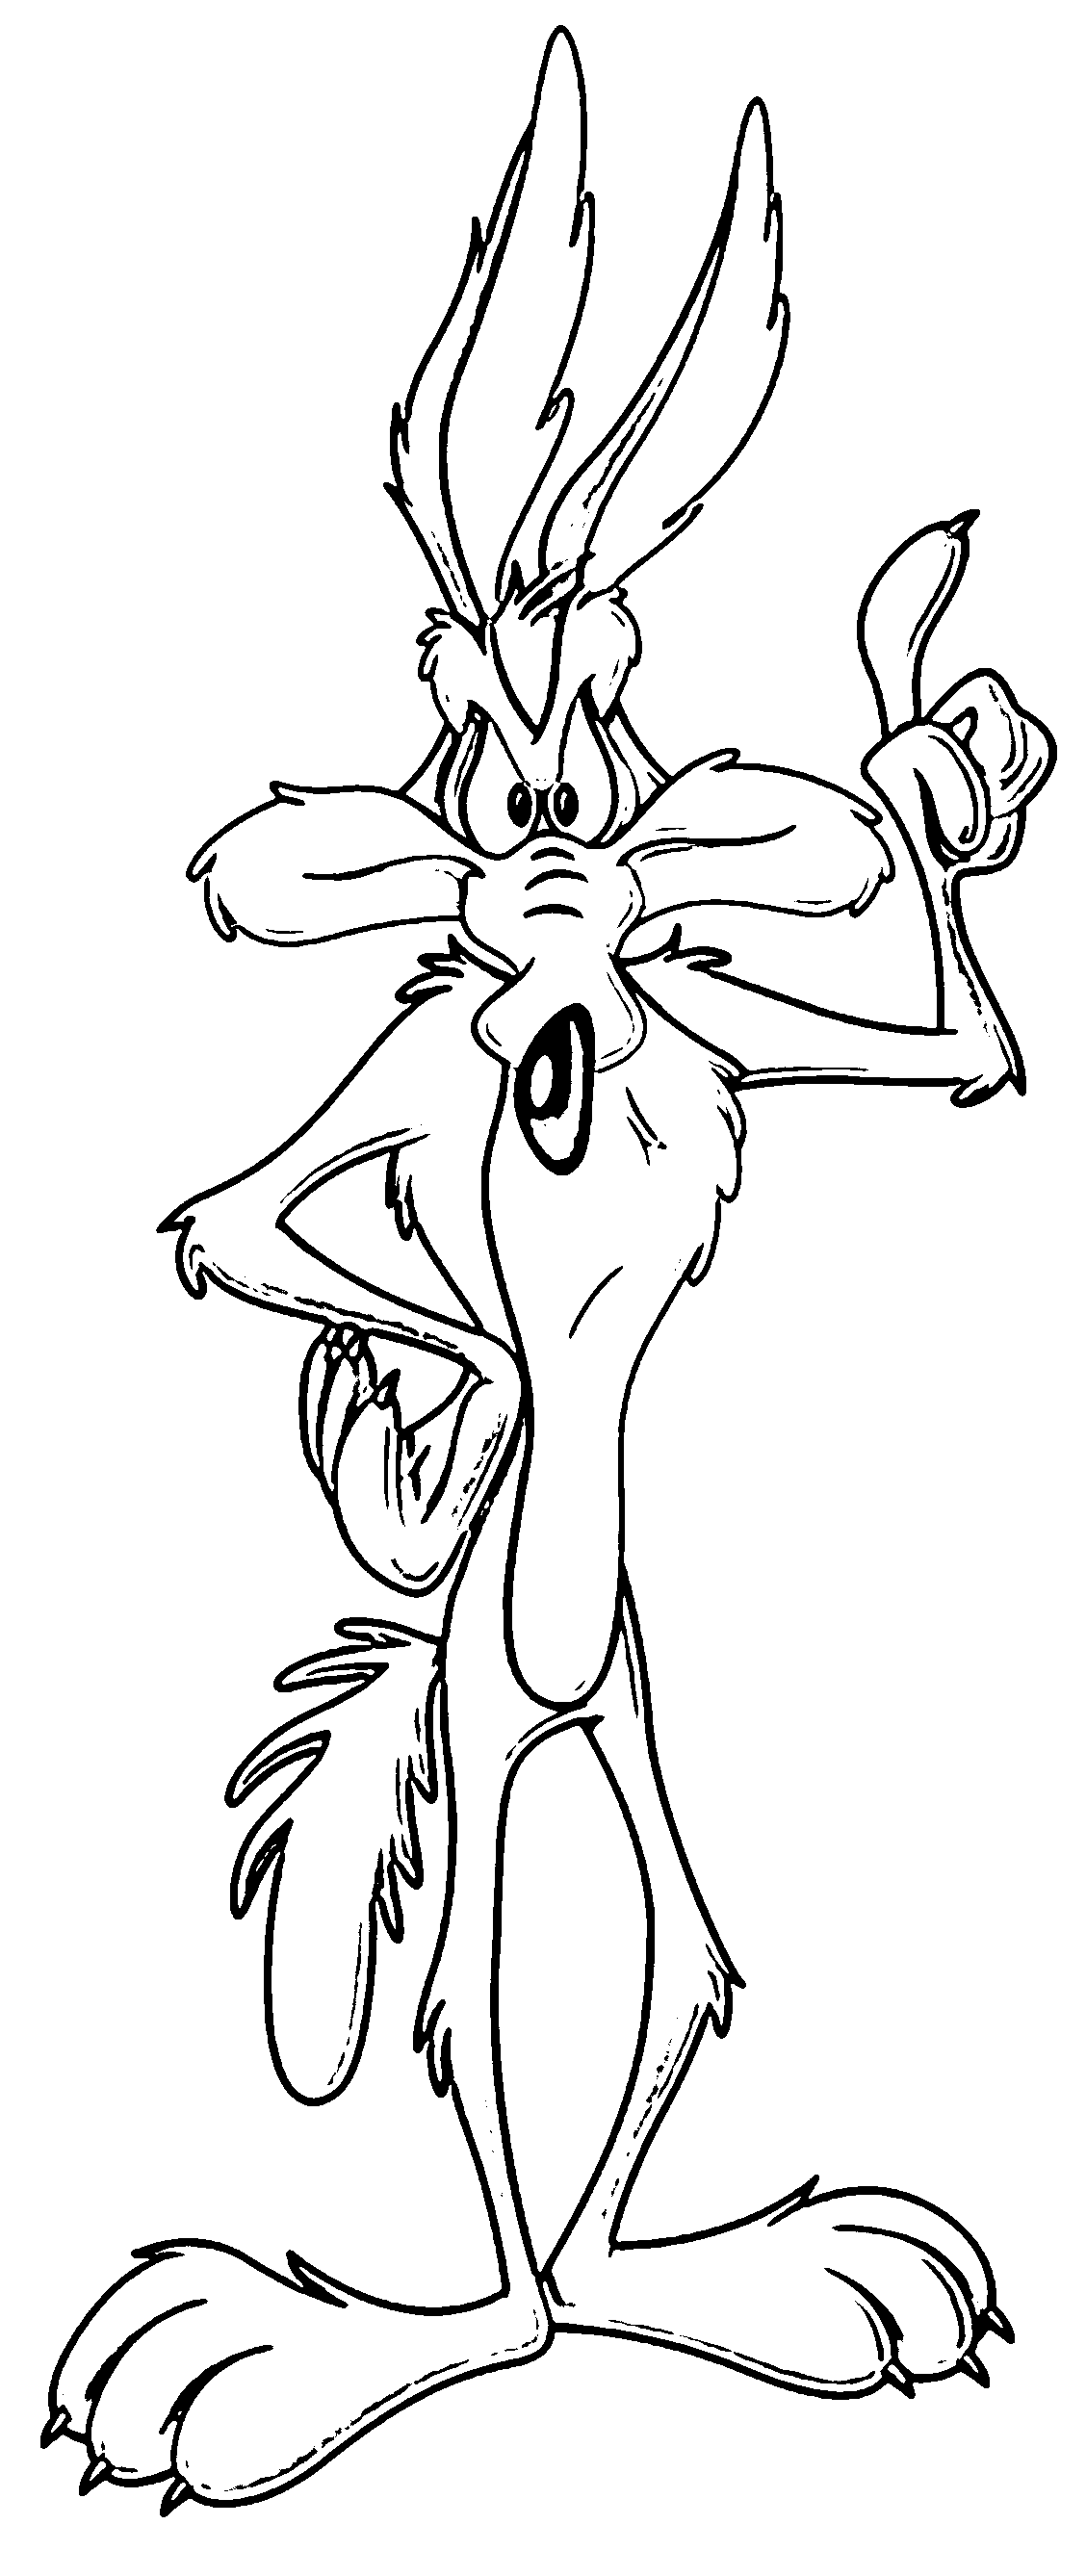 New Roadrunner Coloring Pages Printable with simple drawing